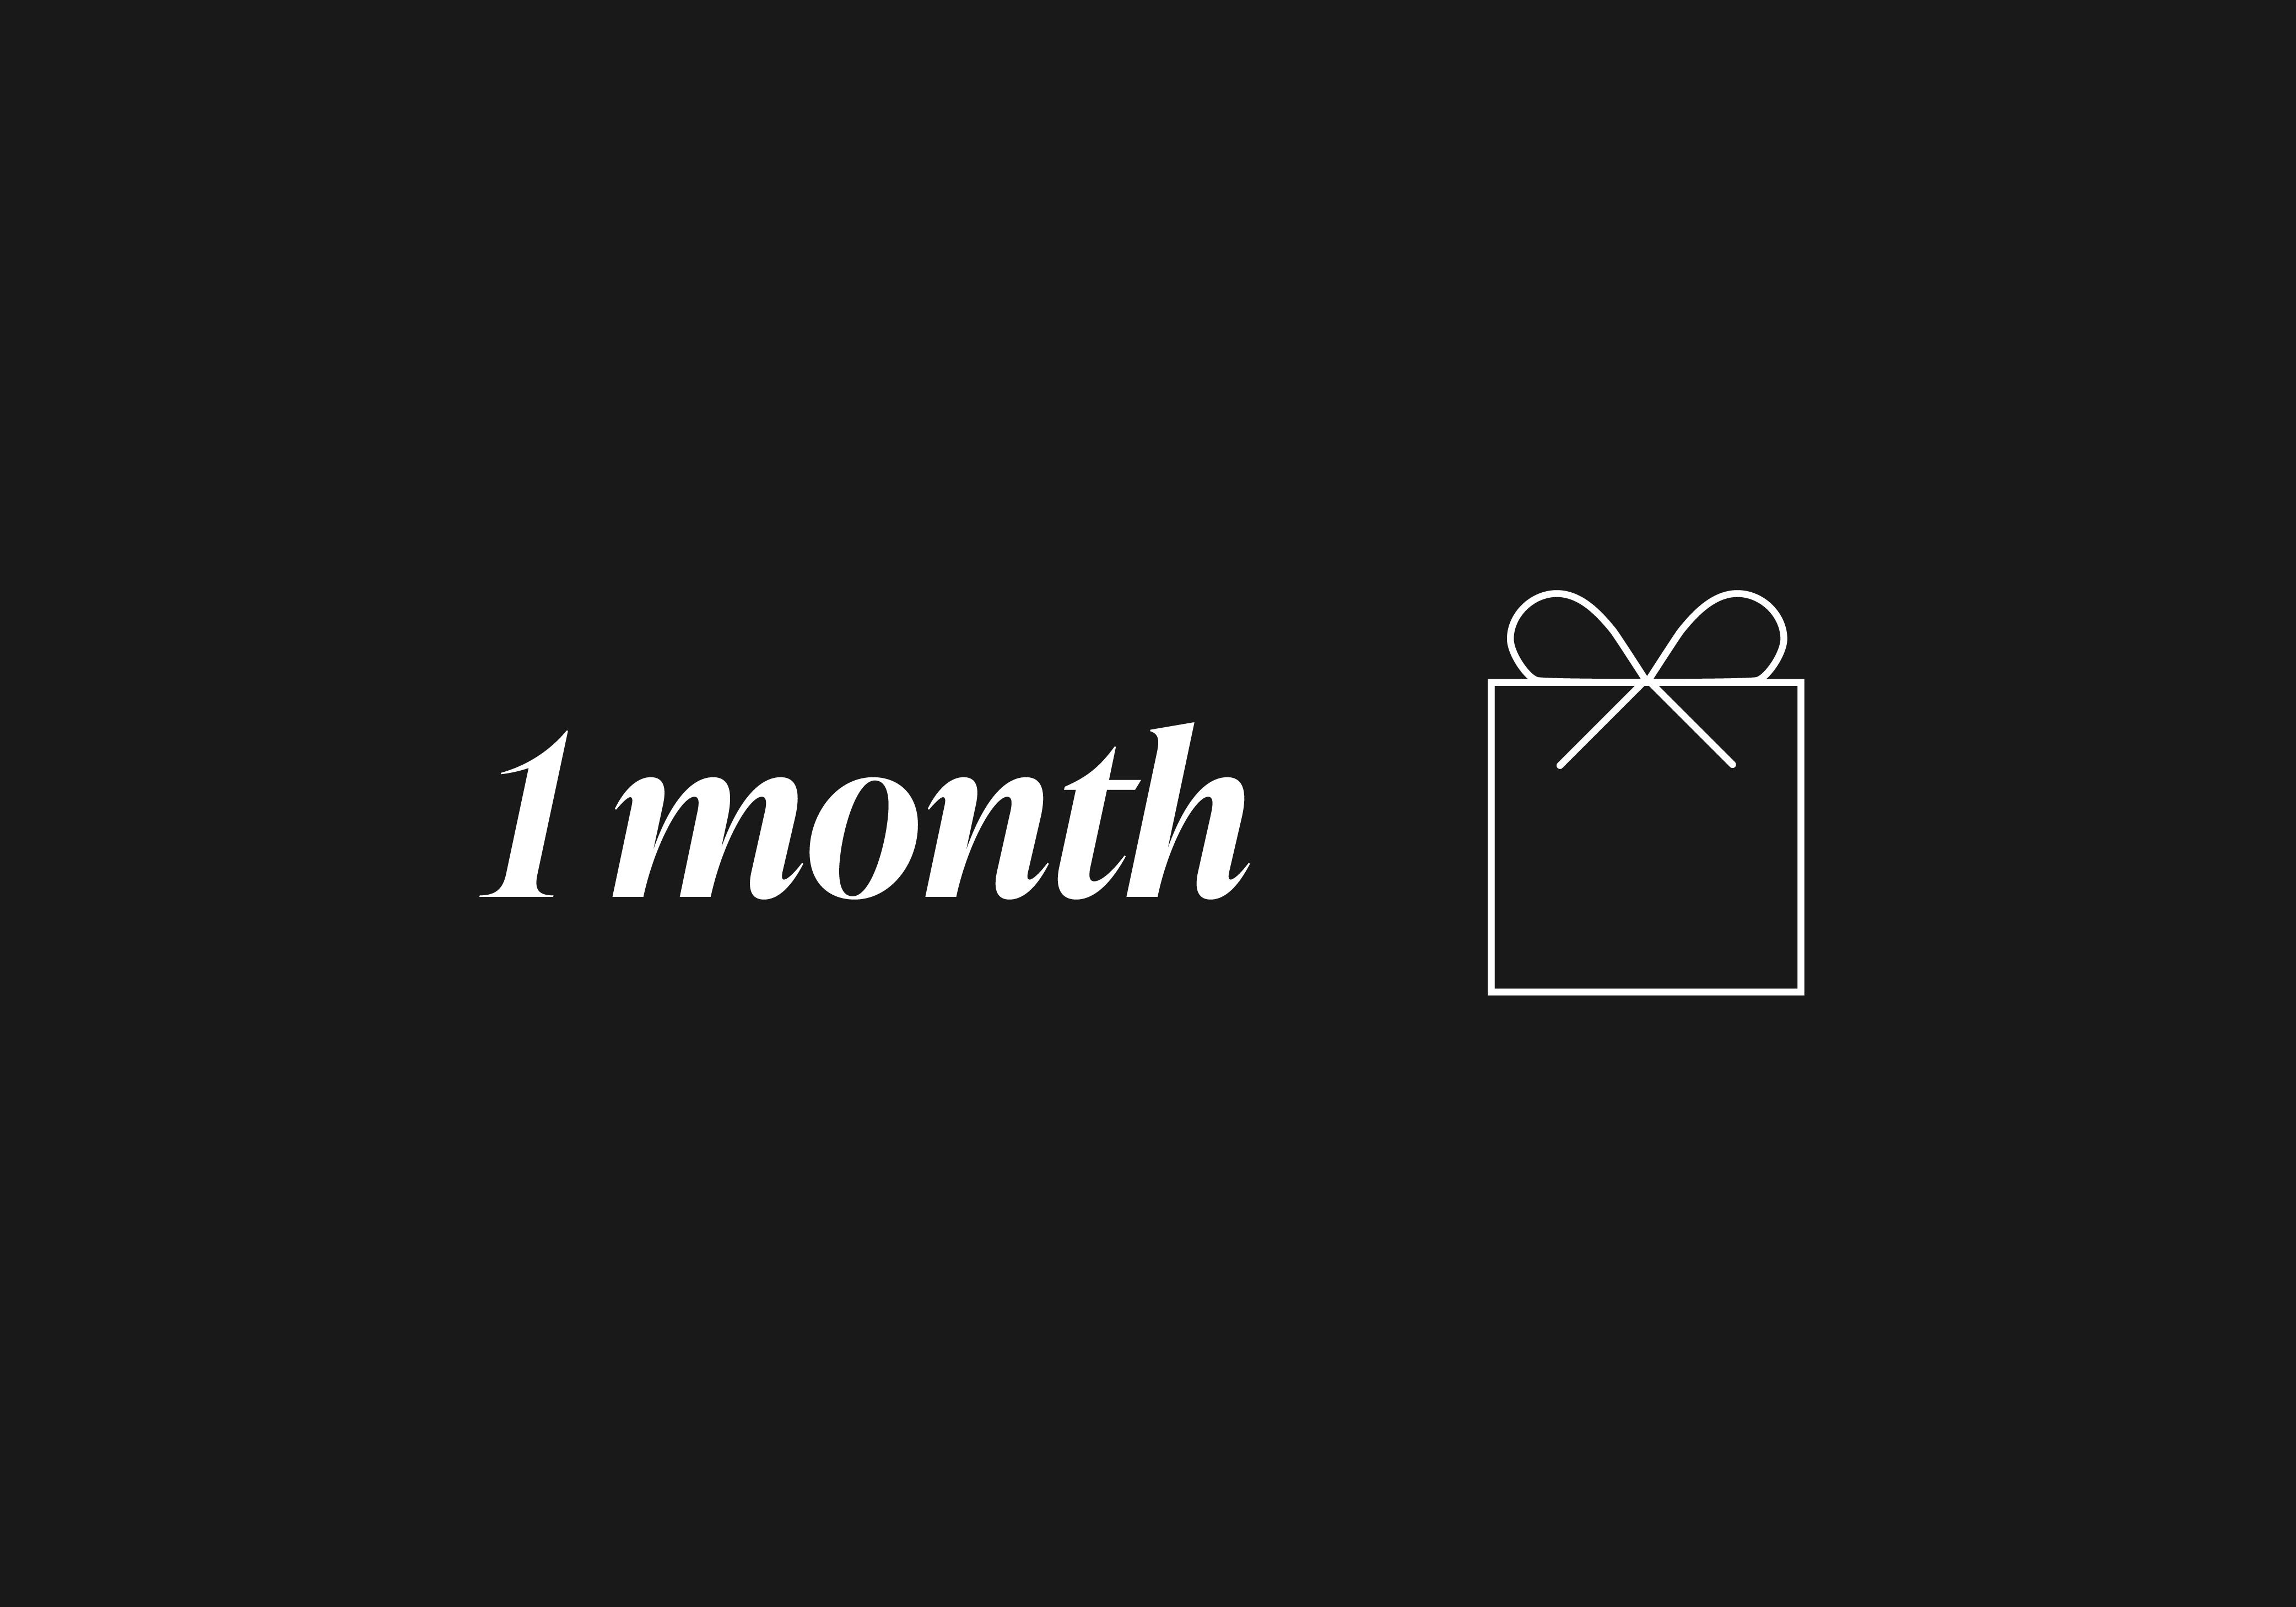 a graphic representing our month to month option.  The graphic has text that reads 1 month and an illustration of a gift box.